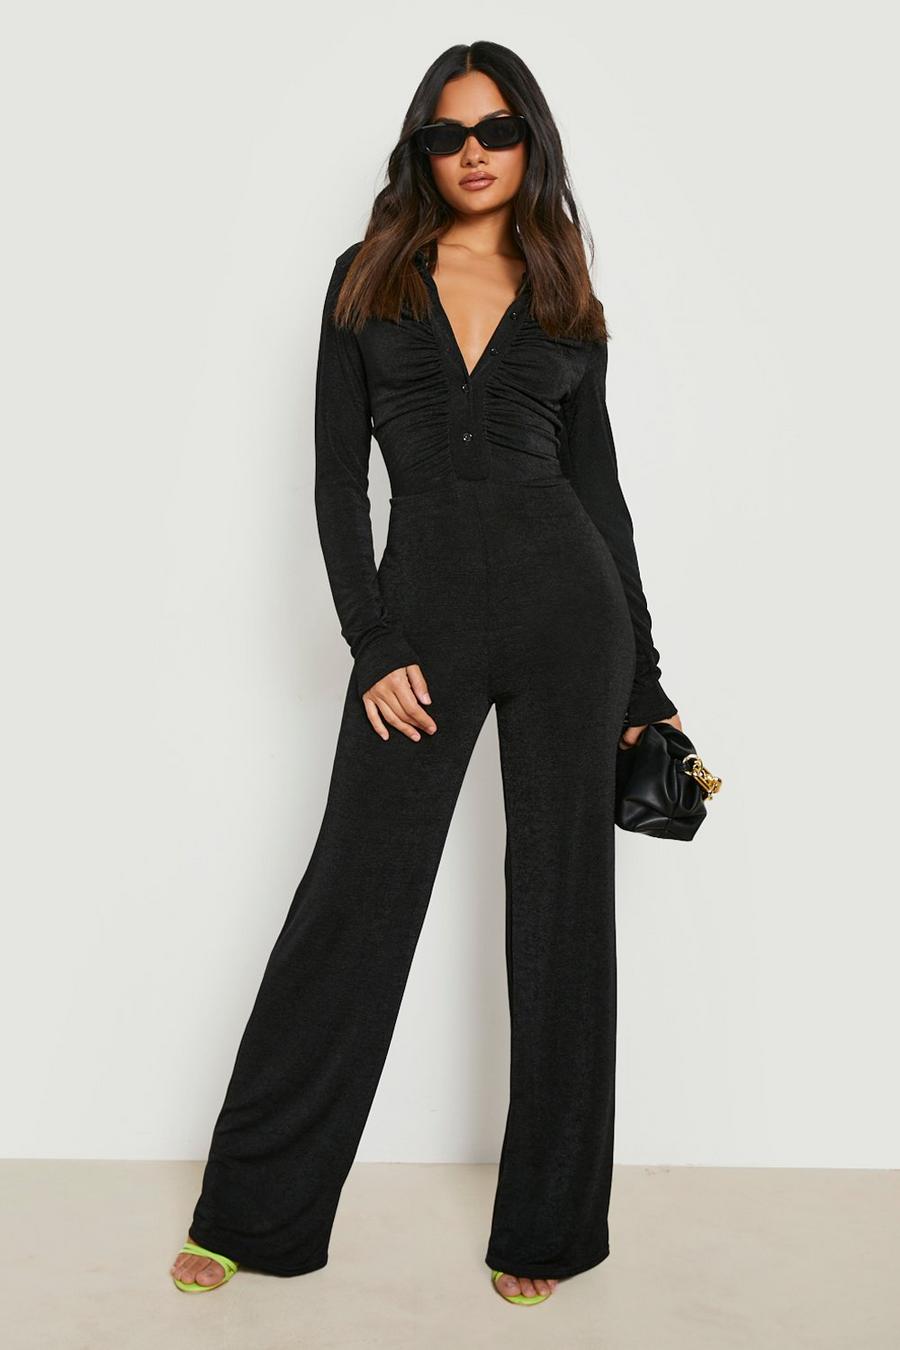 Black Textured Slinky Ruched Wide Leg Jumpsuit